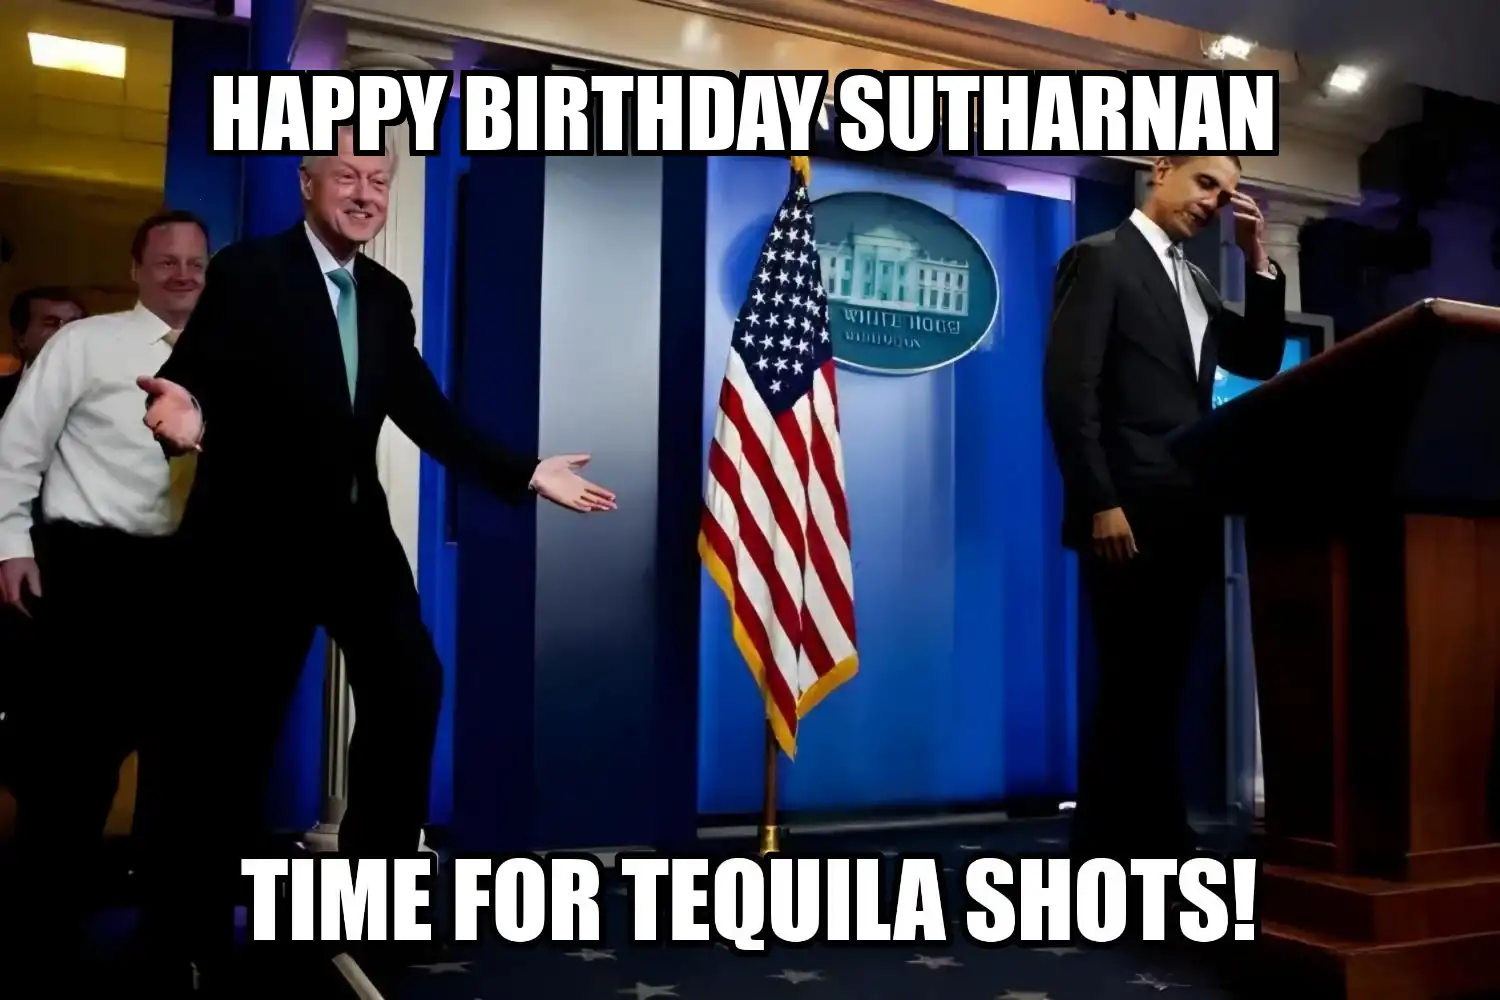 Happy Birthday Sutharnan Time For Tequila Shots Memes